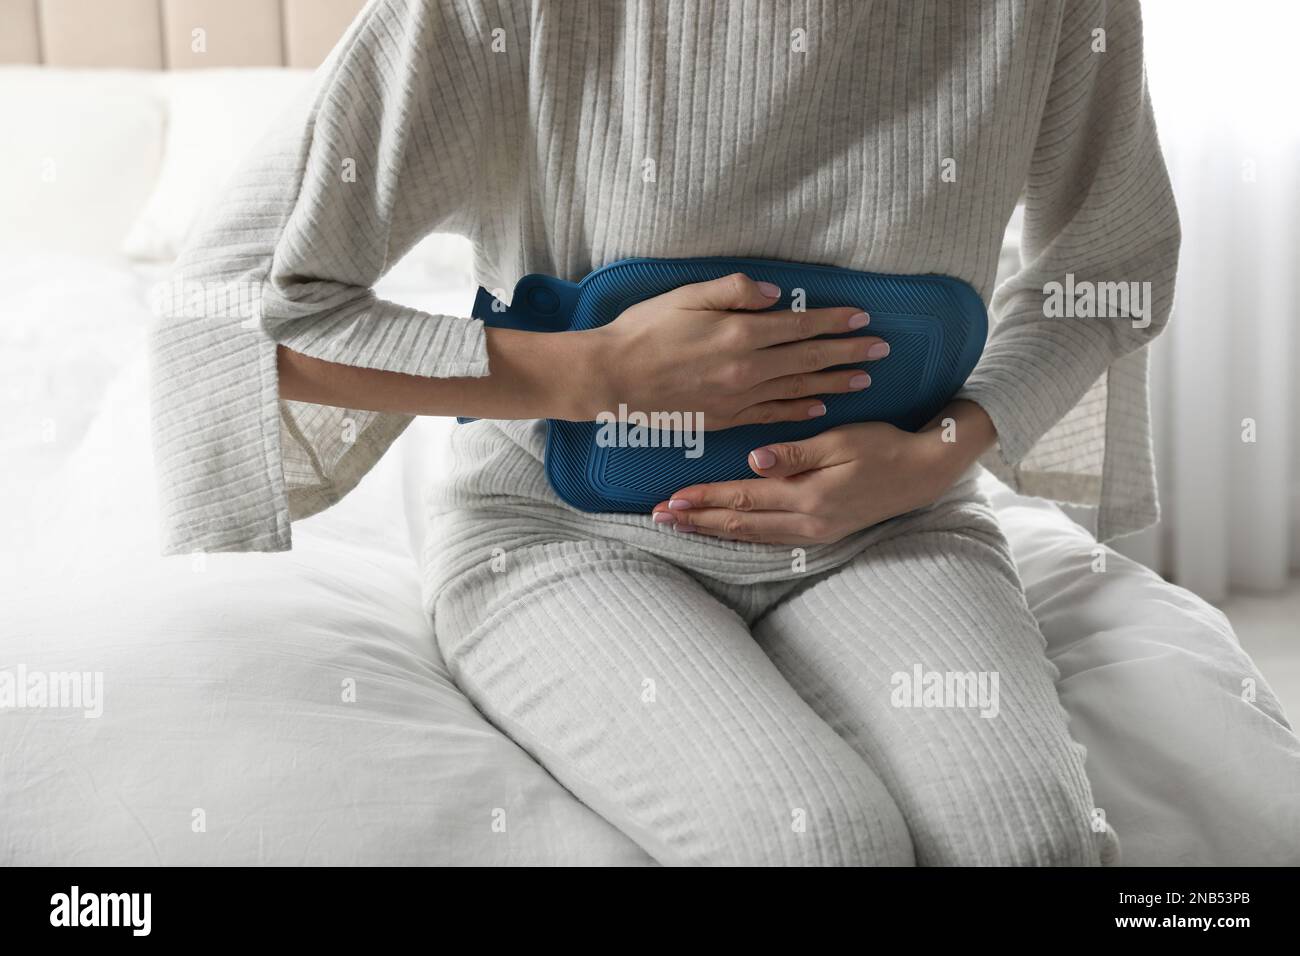 Woman using hot water bottle to relieve abdominal pain on bed at home, closeup Stock Photo